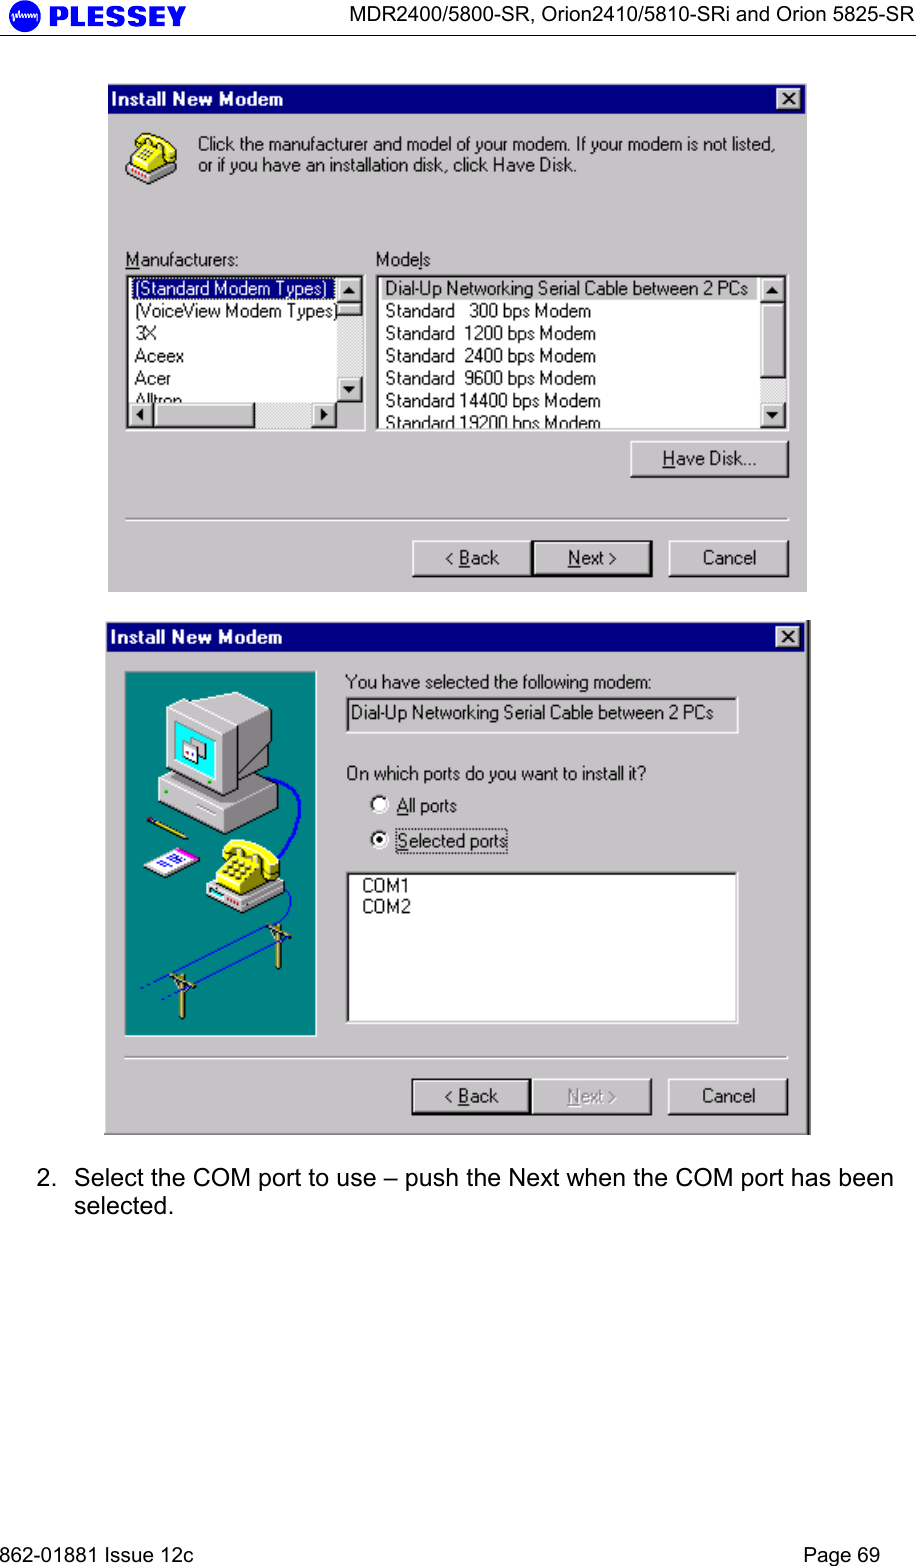      MDR2400/5800-SR, Orion2410/5810-SRi and Orion 5825-SR   862-01881 Issue 12c    Page 69     2.  Select the COM port to use – push the Next when the COM port has been selected.  